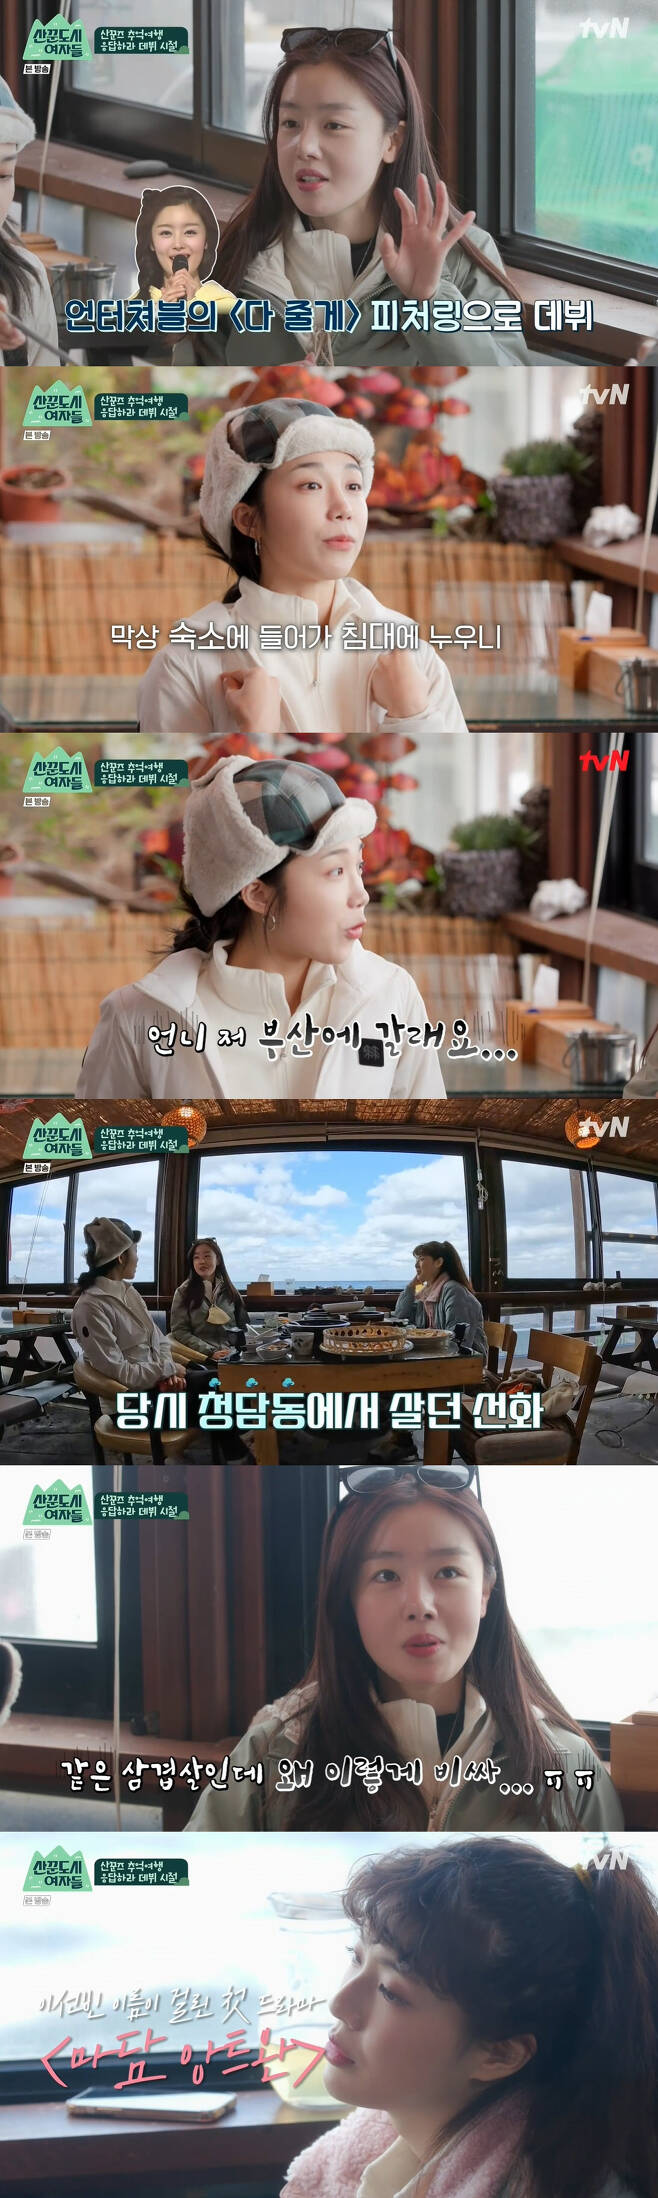 Actor Kim Ji-Seok has shown a fondness for choreographer Monica.On the 25th TVN entertainment program women in the city of industrialists, the meeting of Jeju Island of Jeong Eunji, Lee Sun-bin, Han Sun-hwa and Kim Ji-seok was broadcast.Jung Eunji, Lee Sun-bin and Han Sun-hwa had breakfast and talked about debut candles; Jung Eunji said: I tried to run away as soon as I debut.I was born and never lived away from my mother (to prepare for debut) but I came up alone in Busan to Seoul. I was in bed and I thought arrogantly.It was because of uncertainty about the future, he said, crying to leader Park Cho-rong, saying, I will not.The surprised managers said the situation was over.He also asked the members to consider what it is that the company has been banned at the beginning of debut.The answer is Yanpink Lipstick, and Jung Eunji said, The Yanpink is not so good that the makeup teacher applied it in different colors.Han Sun-hwa said: I lived in Cheongdam-dong in the beginning of debut; my mom came to the restaurant (at the lodgings) so I went into the restaurant to buy you a pork belly, and my mom was surprised to see the price tag.I went to another cheap restaurant because it was too expensive. Then, he headed to Jeju Mark Ormrod eo-seung-ak called Mini Halla Mountain, but Kim Ji-seok appeared in surprise and surprised everyone.Kim Ji-Seok has appeared as a members blind date in The Women of the City of Drinkers. After wearing Eisen together, he started climbing.The four chatty people soon became less powerful and less spoken, especially Kim Ji-seok, who was the most tired, said, I am afraid that I have to go down as much as I have gone up.As we neared the top, we were amazed at the beautiful snowy scenery, and we were all happy with the tea time together.On the way to the hostel, Kim Ji-Seok was asked, What reason do you feel attractive to? I saw Swoopa and Monica was good.I want to be pointed out (to Monica) because I look good in the way Im angry. Han Sun-hwa said, Today, the three of us will arrest you. Jung Eunji said, I will send you to the point of crazy.The hostel that arrived soon was filled with a lot of exclamation because there were many private open-air baths and spacious rooms in the bathtub.